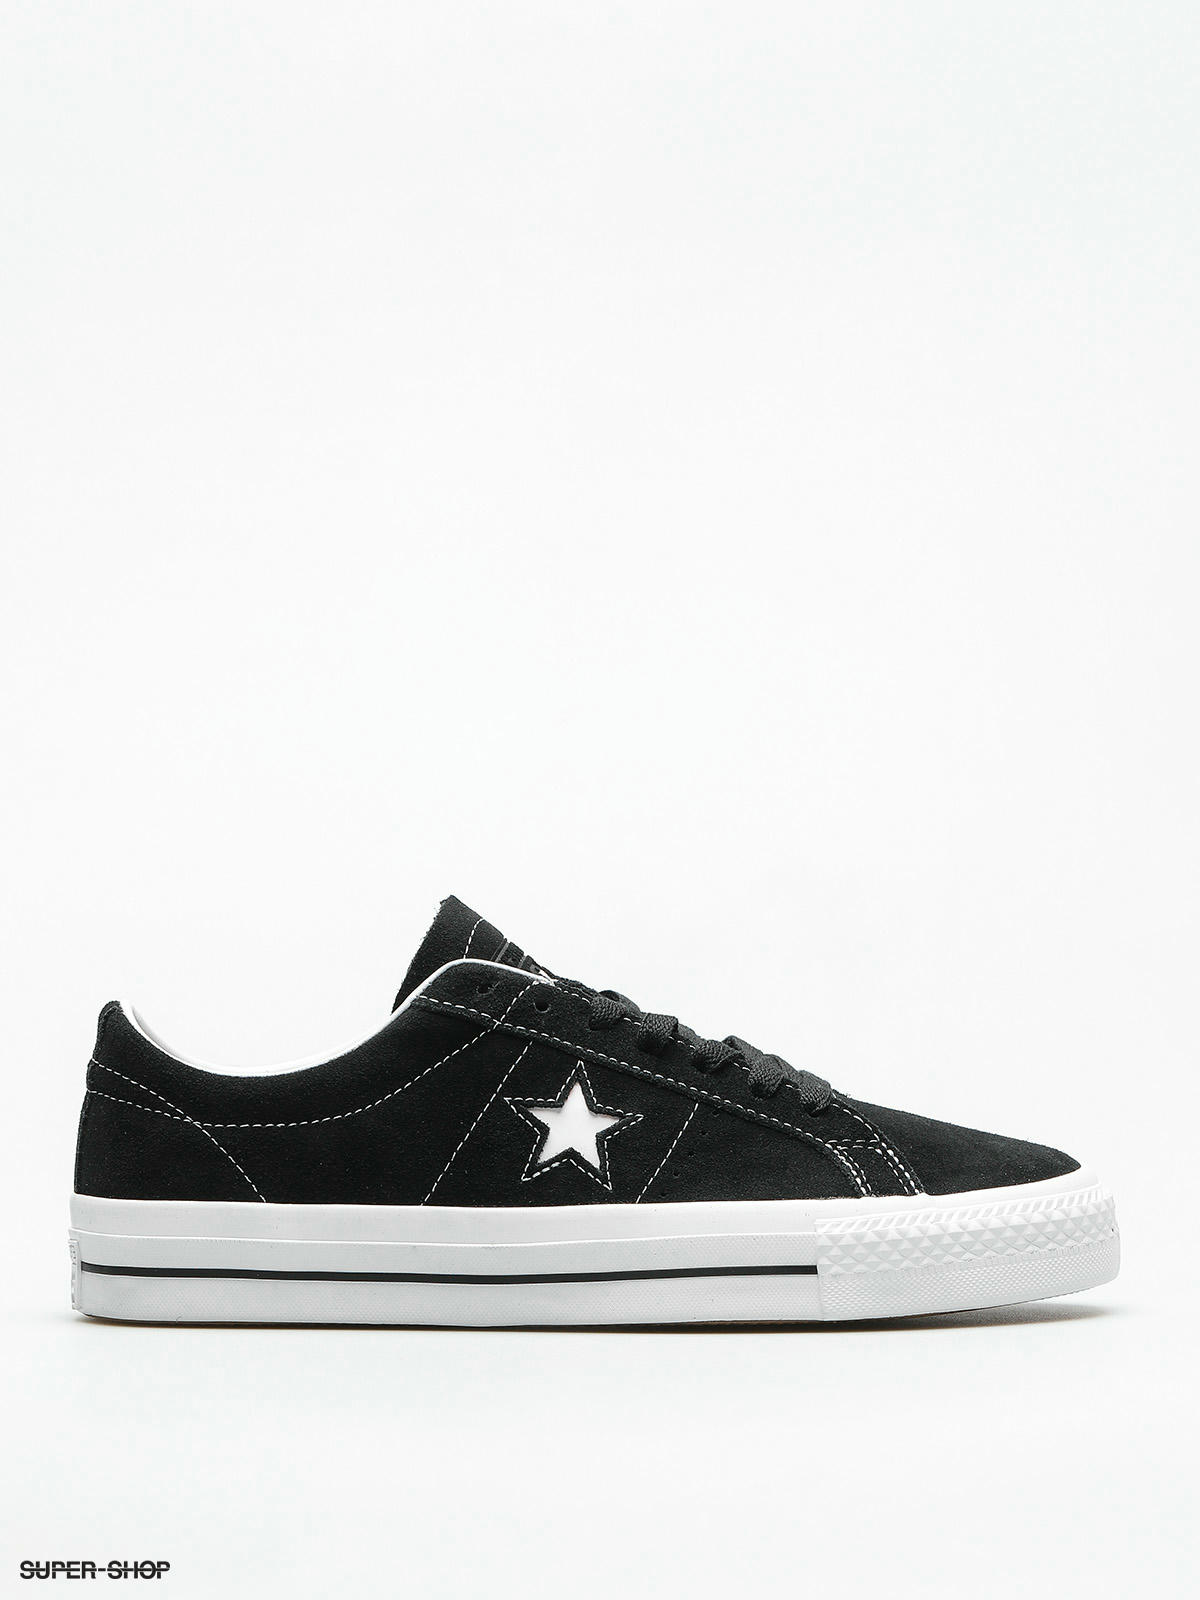 Converse Shoes One Star Pro Refinement 